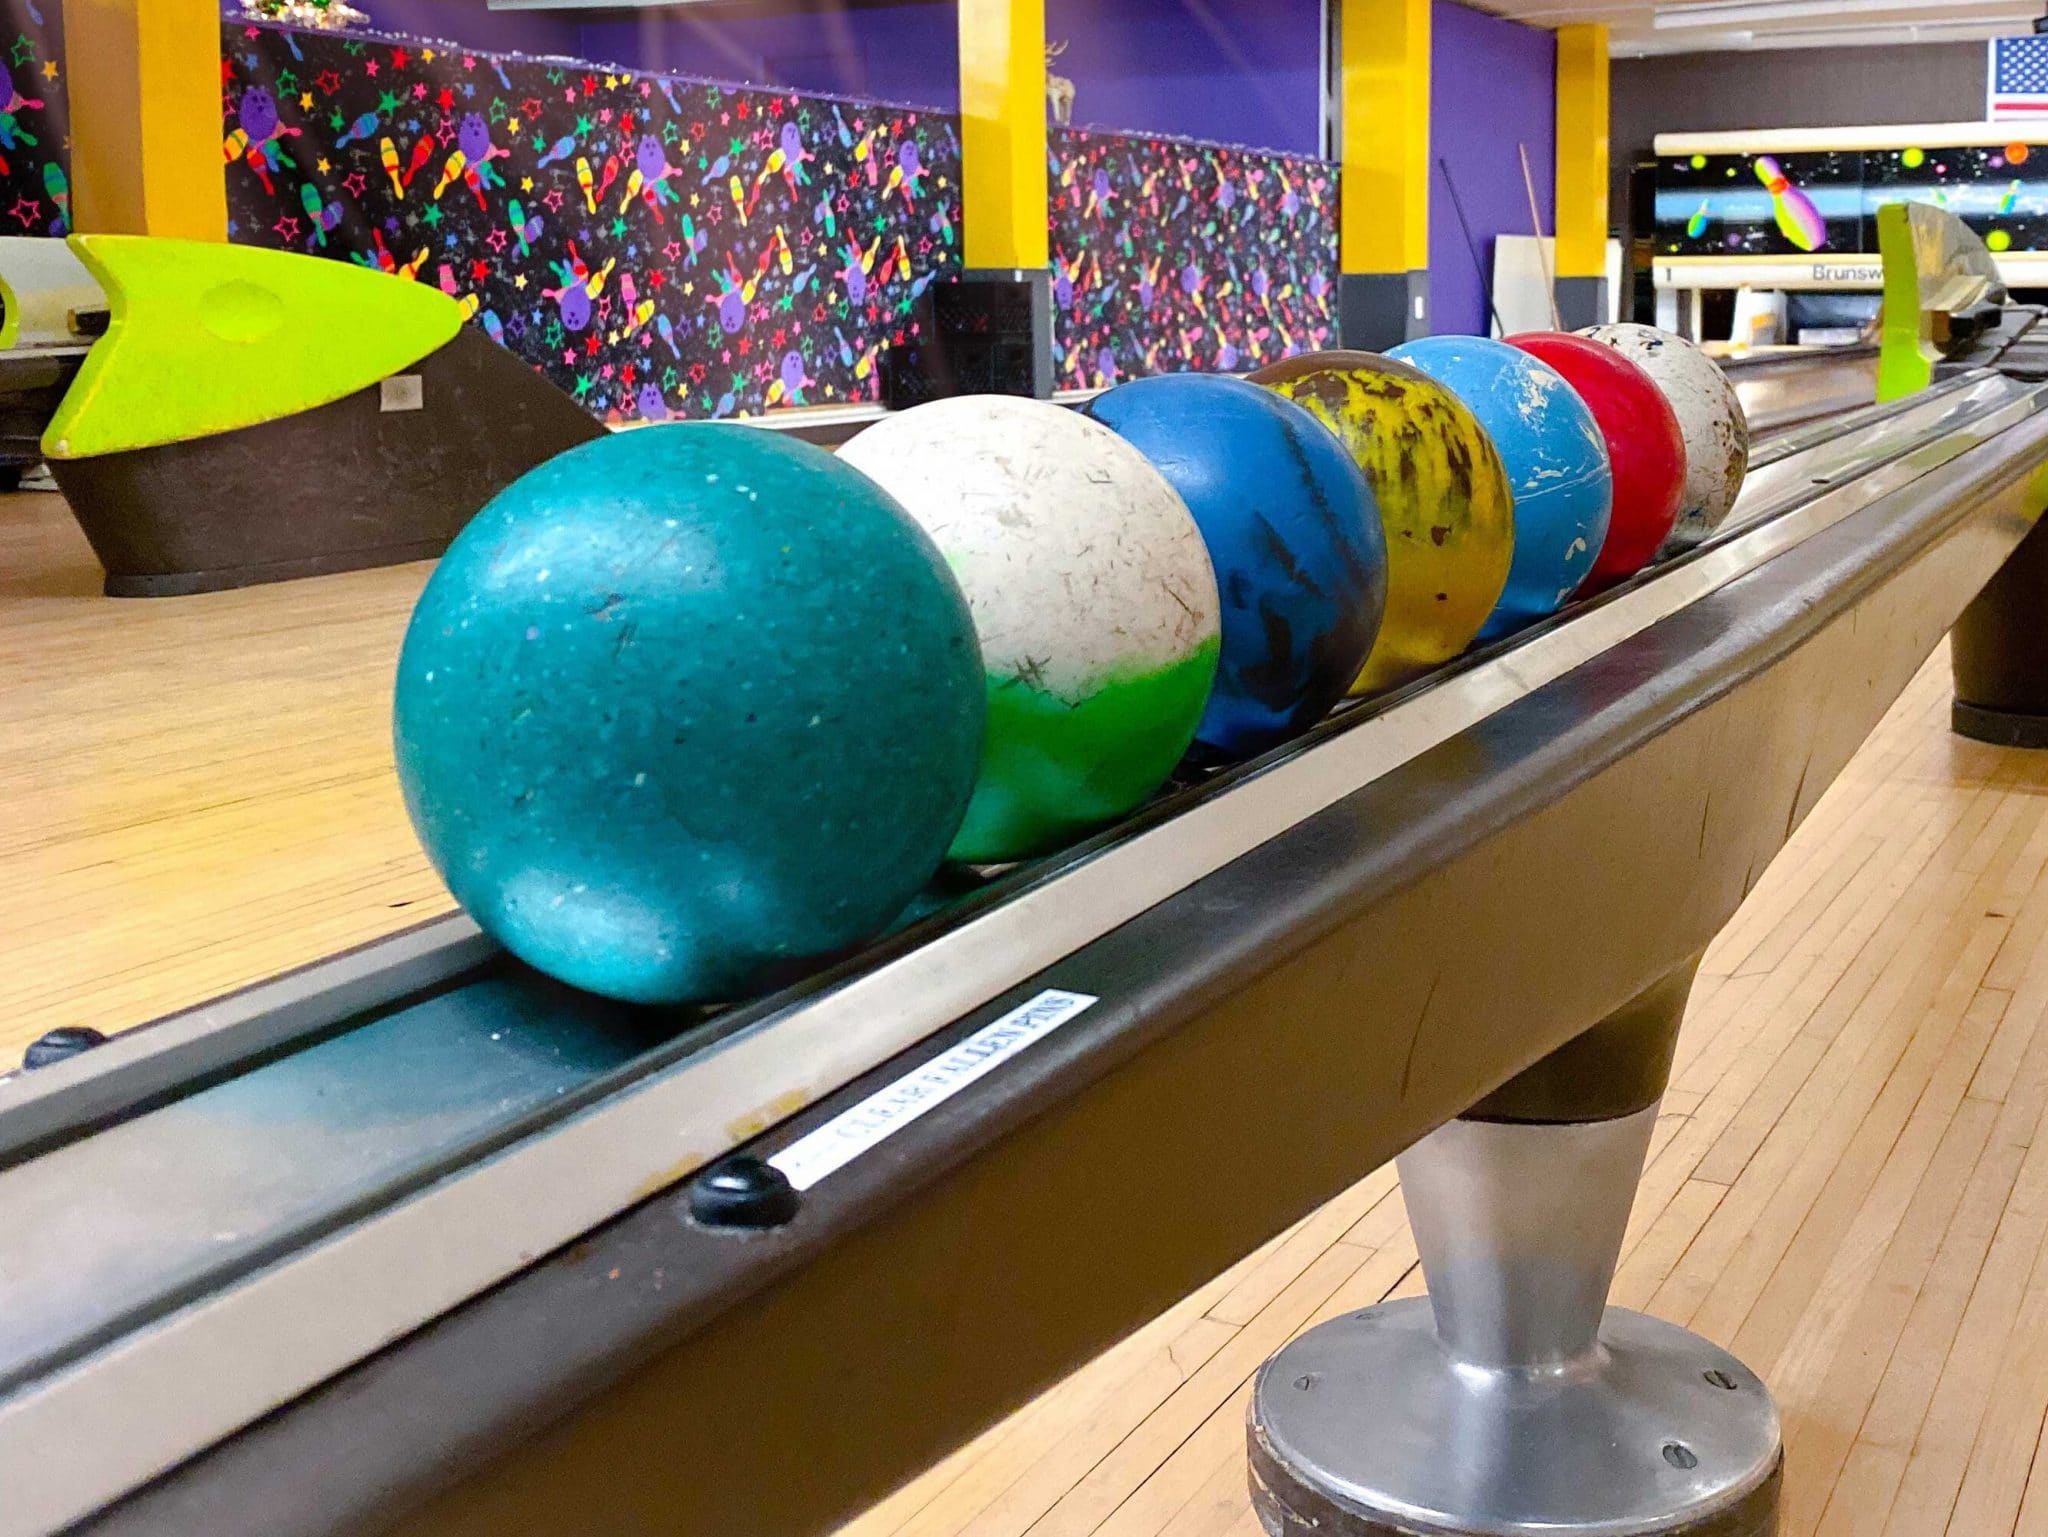 Duckpin Bowling balls in various colors, lined up and ready for use